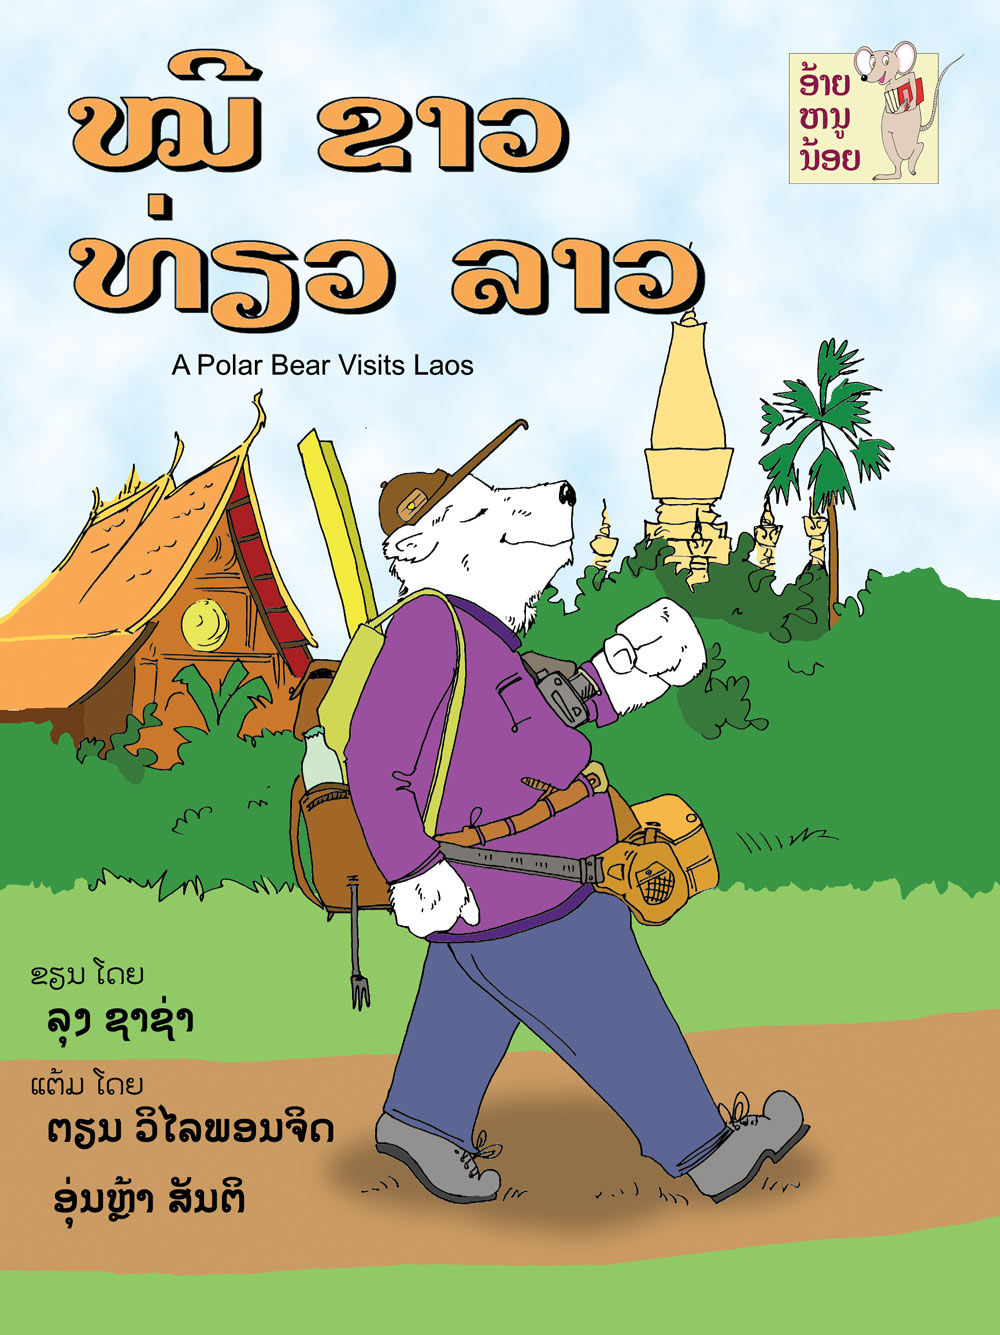 Polar Bear Visits Laos large book cover, published in Lao and English